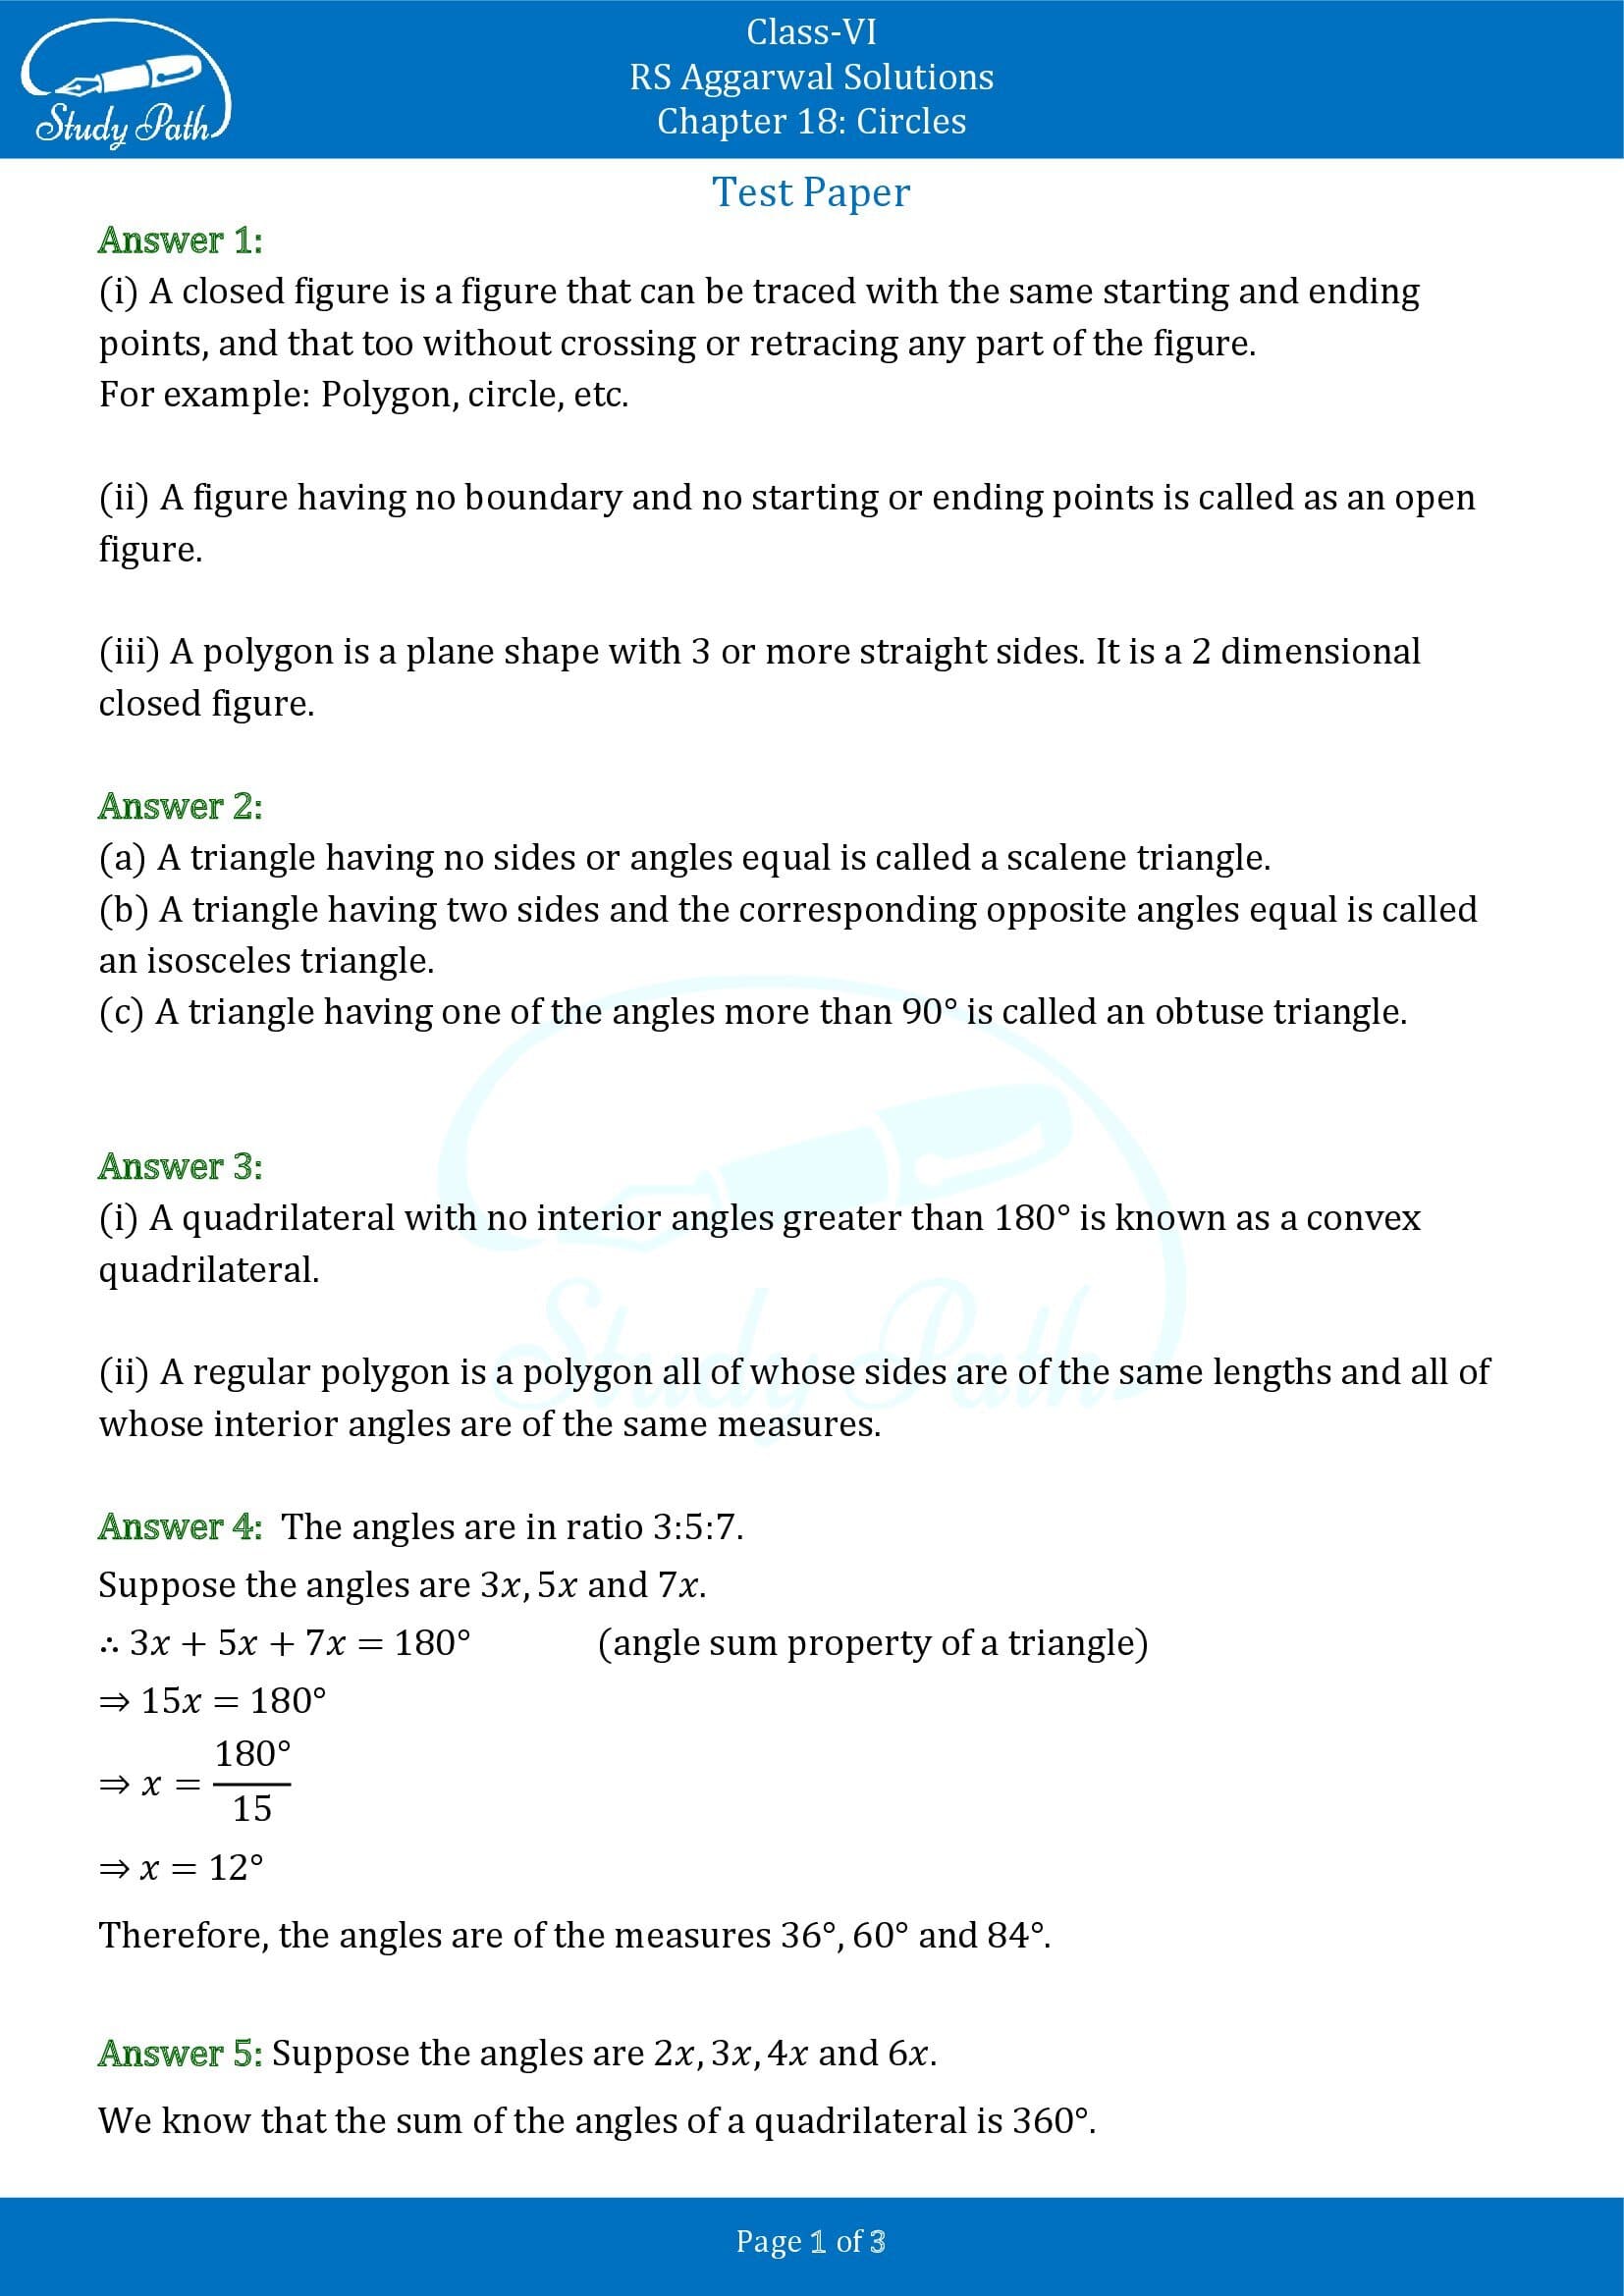 RS Aggarwal Solutions Class 6 Chapter 18 Circles Test Paper 0001